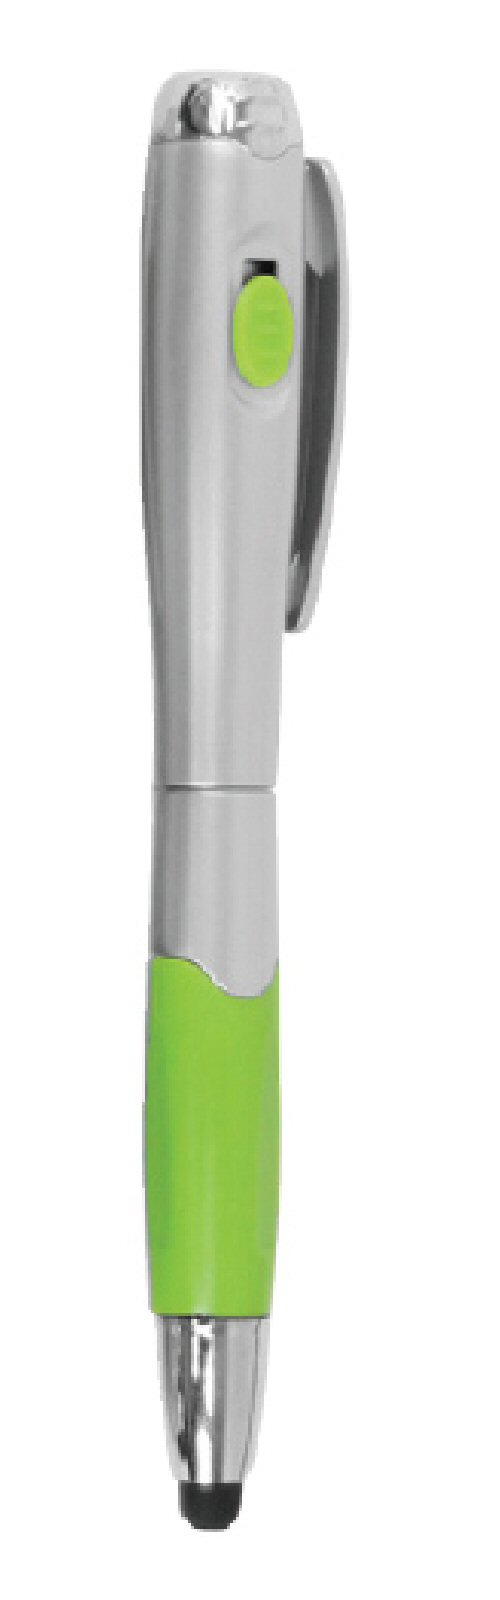 3-Way Tablet Stylus, GREEN Pen & LED Light for iPad, Android